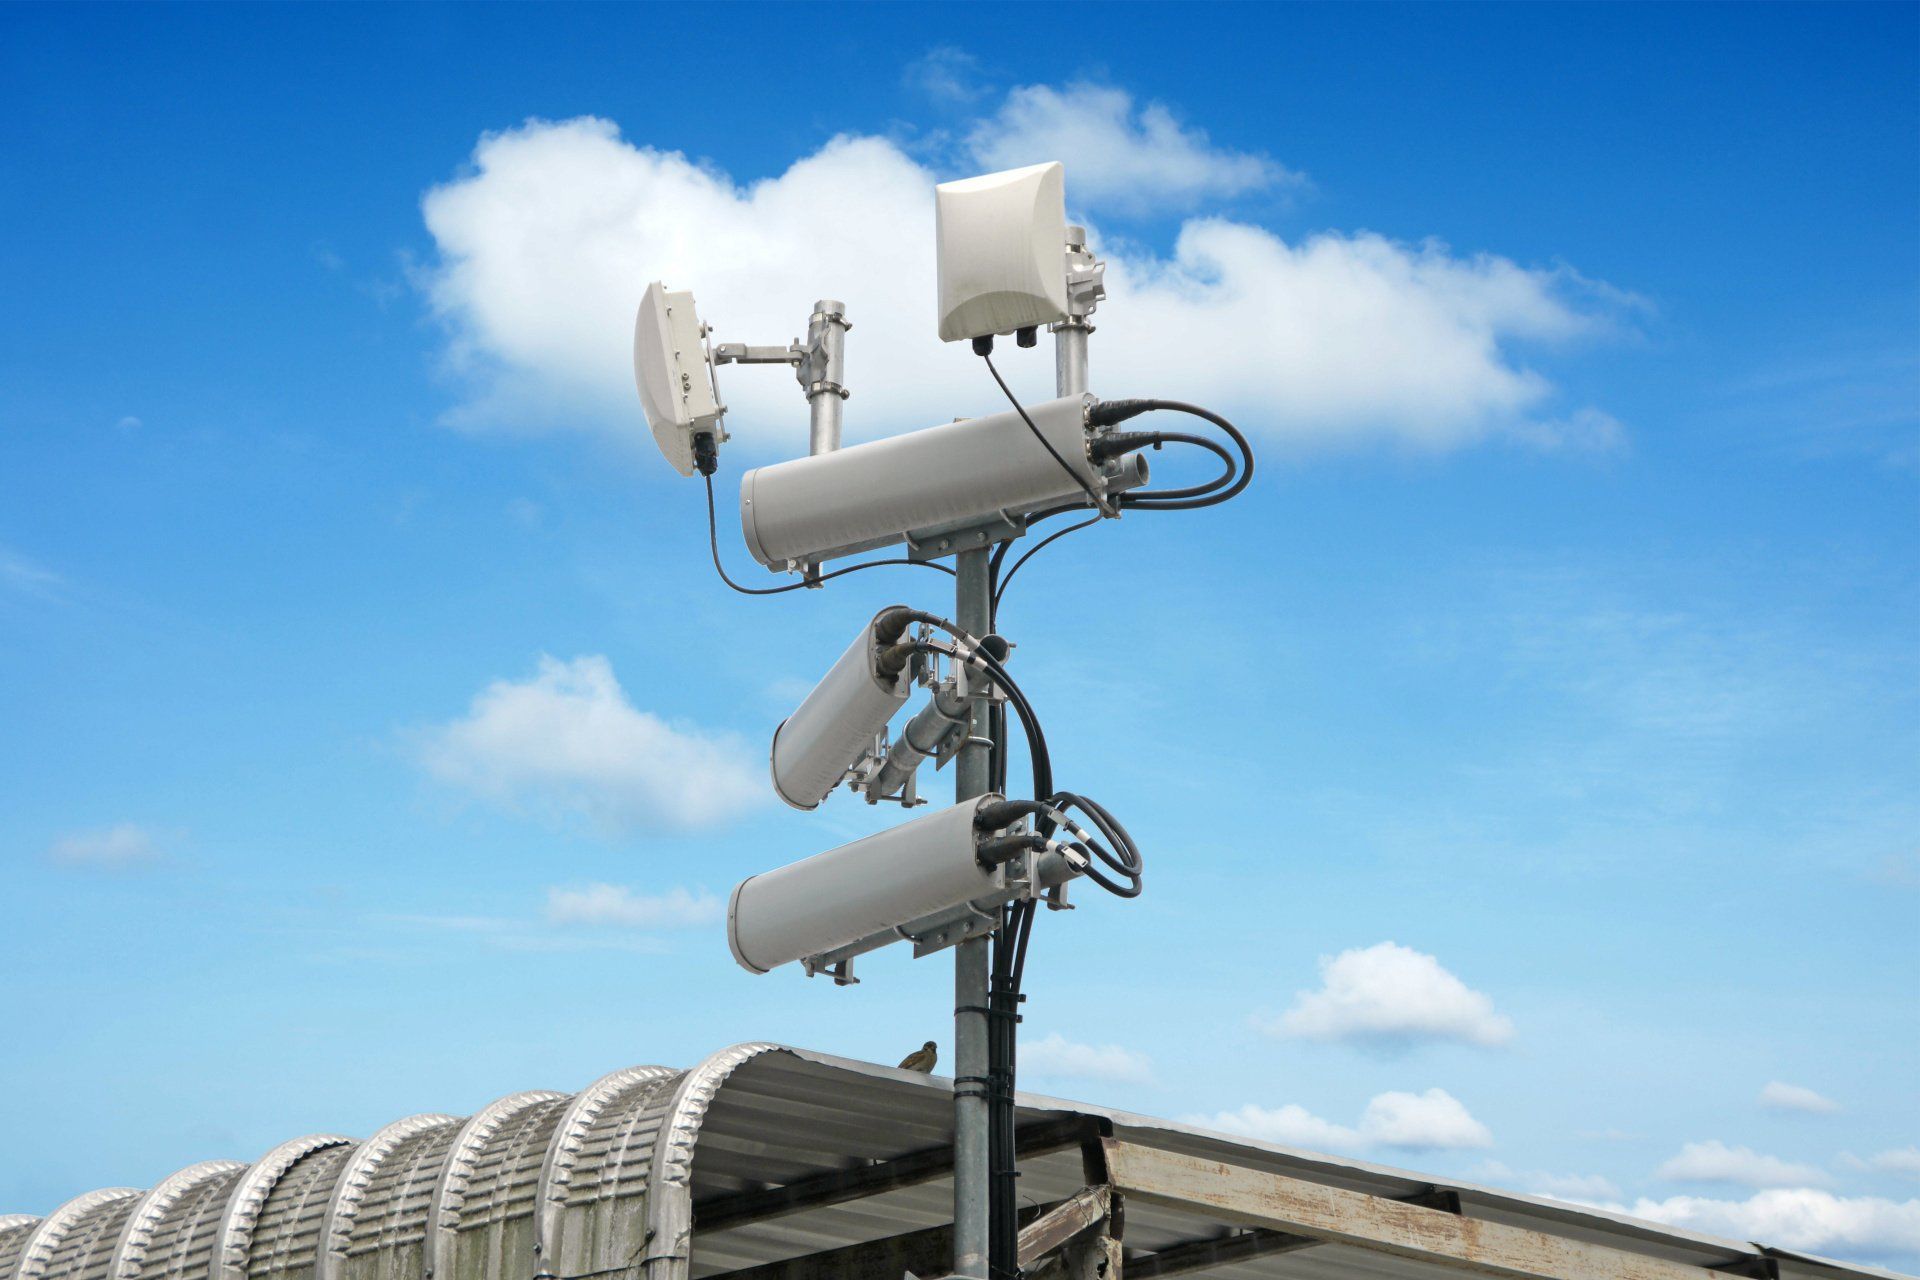 Outdoor distributed antenna system (DAS) against blue sky boosts wireless signal in the area